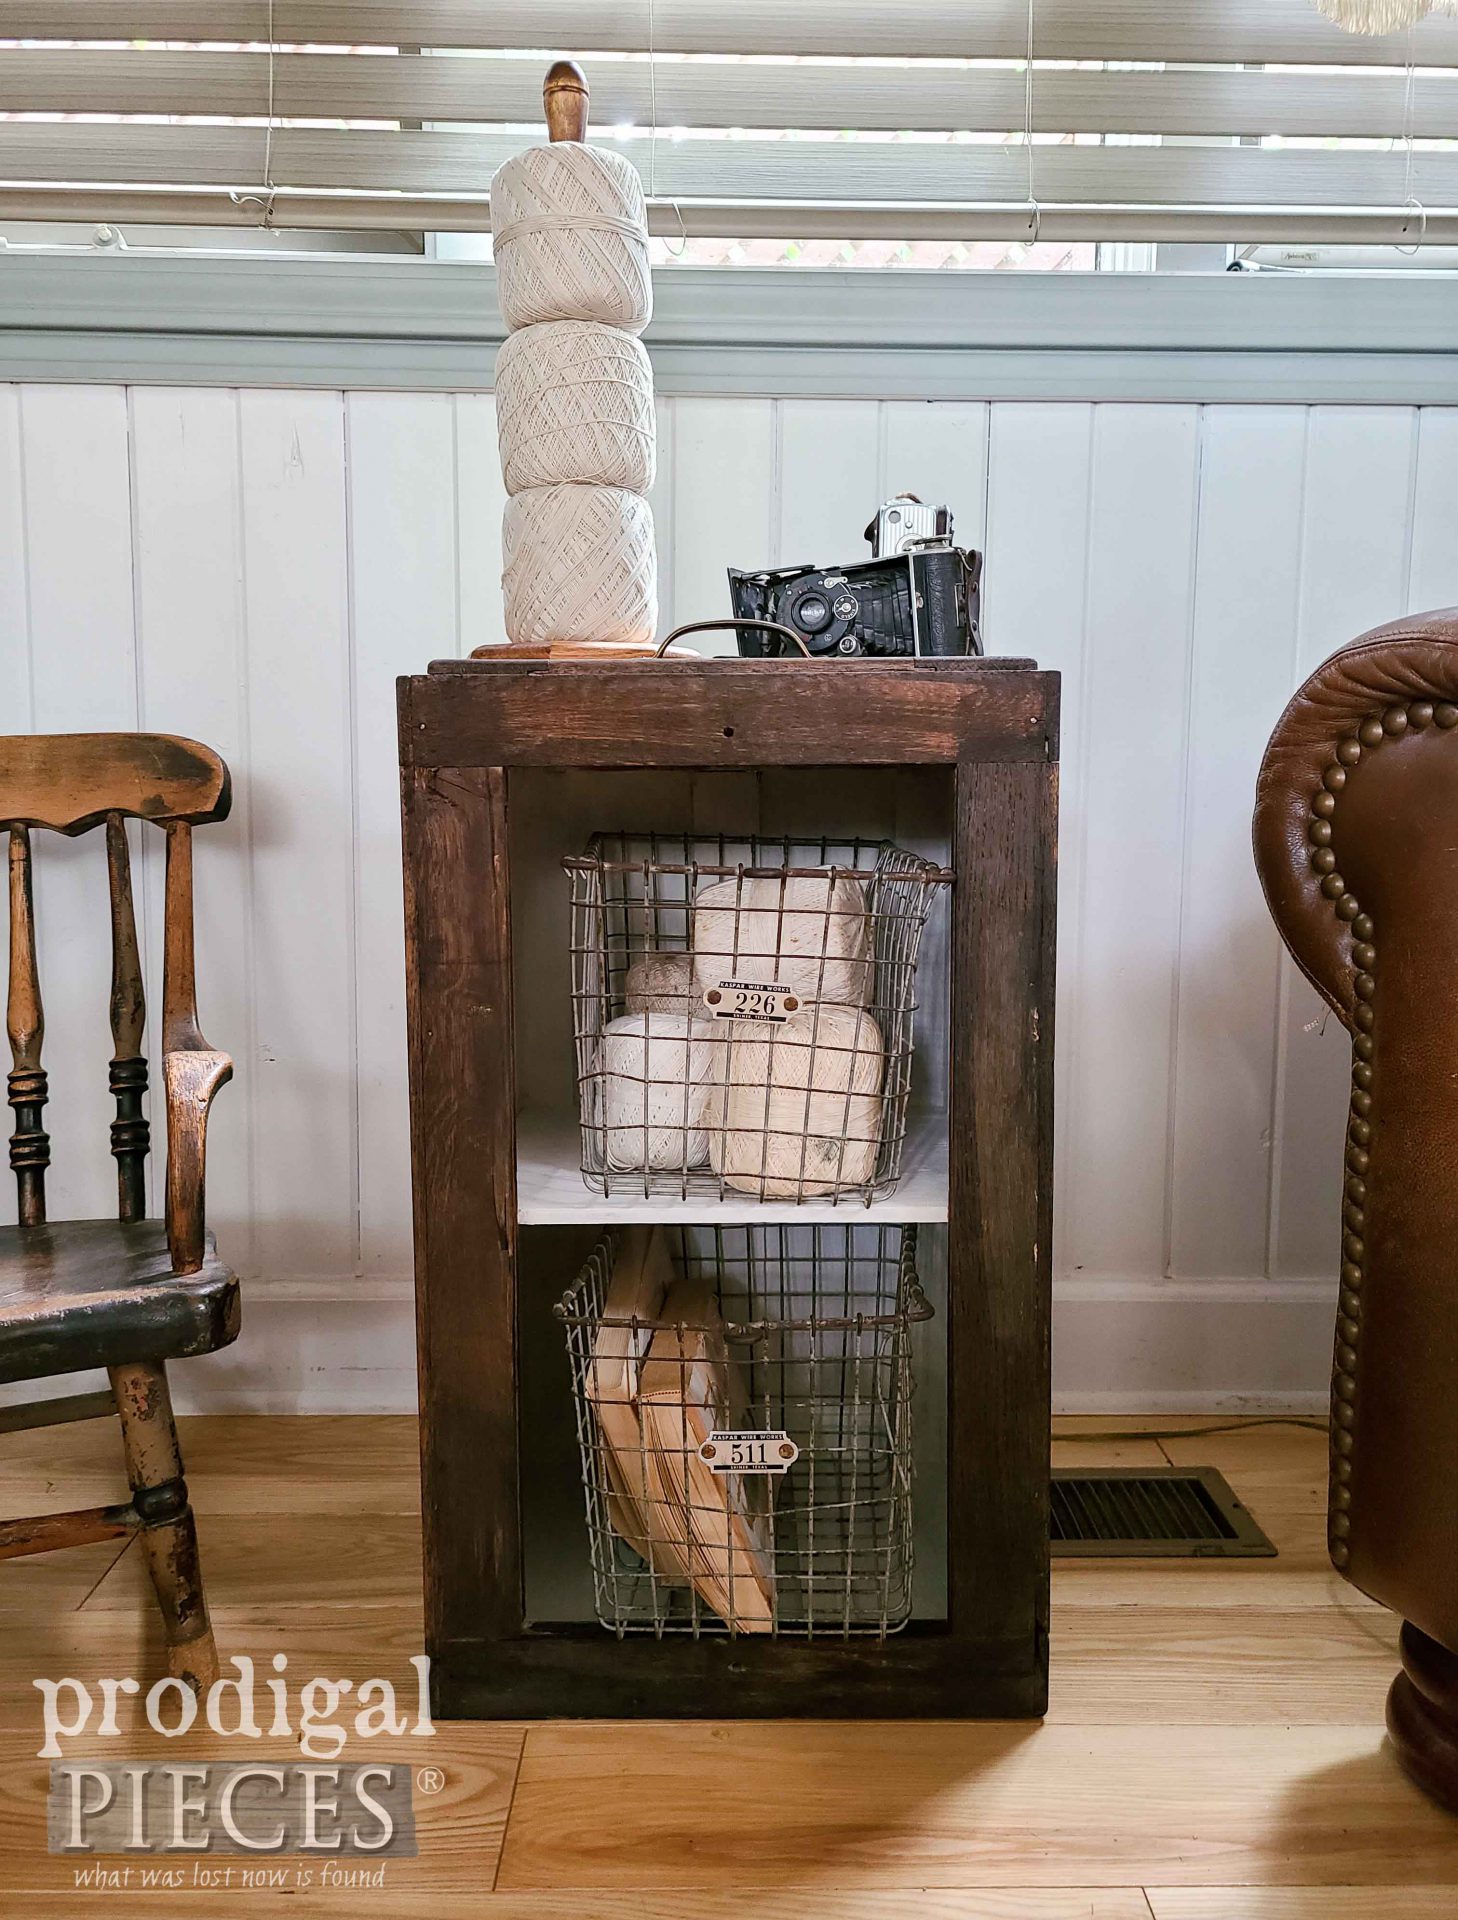 Antique Filing Cabinet Stand Reclaimed by Larissa of Prodigal Pieces | prodigalpieces.com #prodigalpieces #farmhouse #rustic #furniture